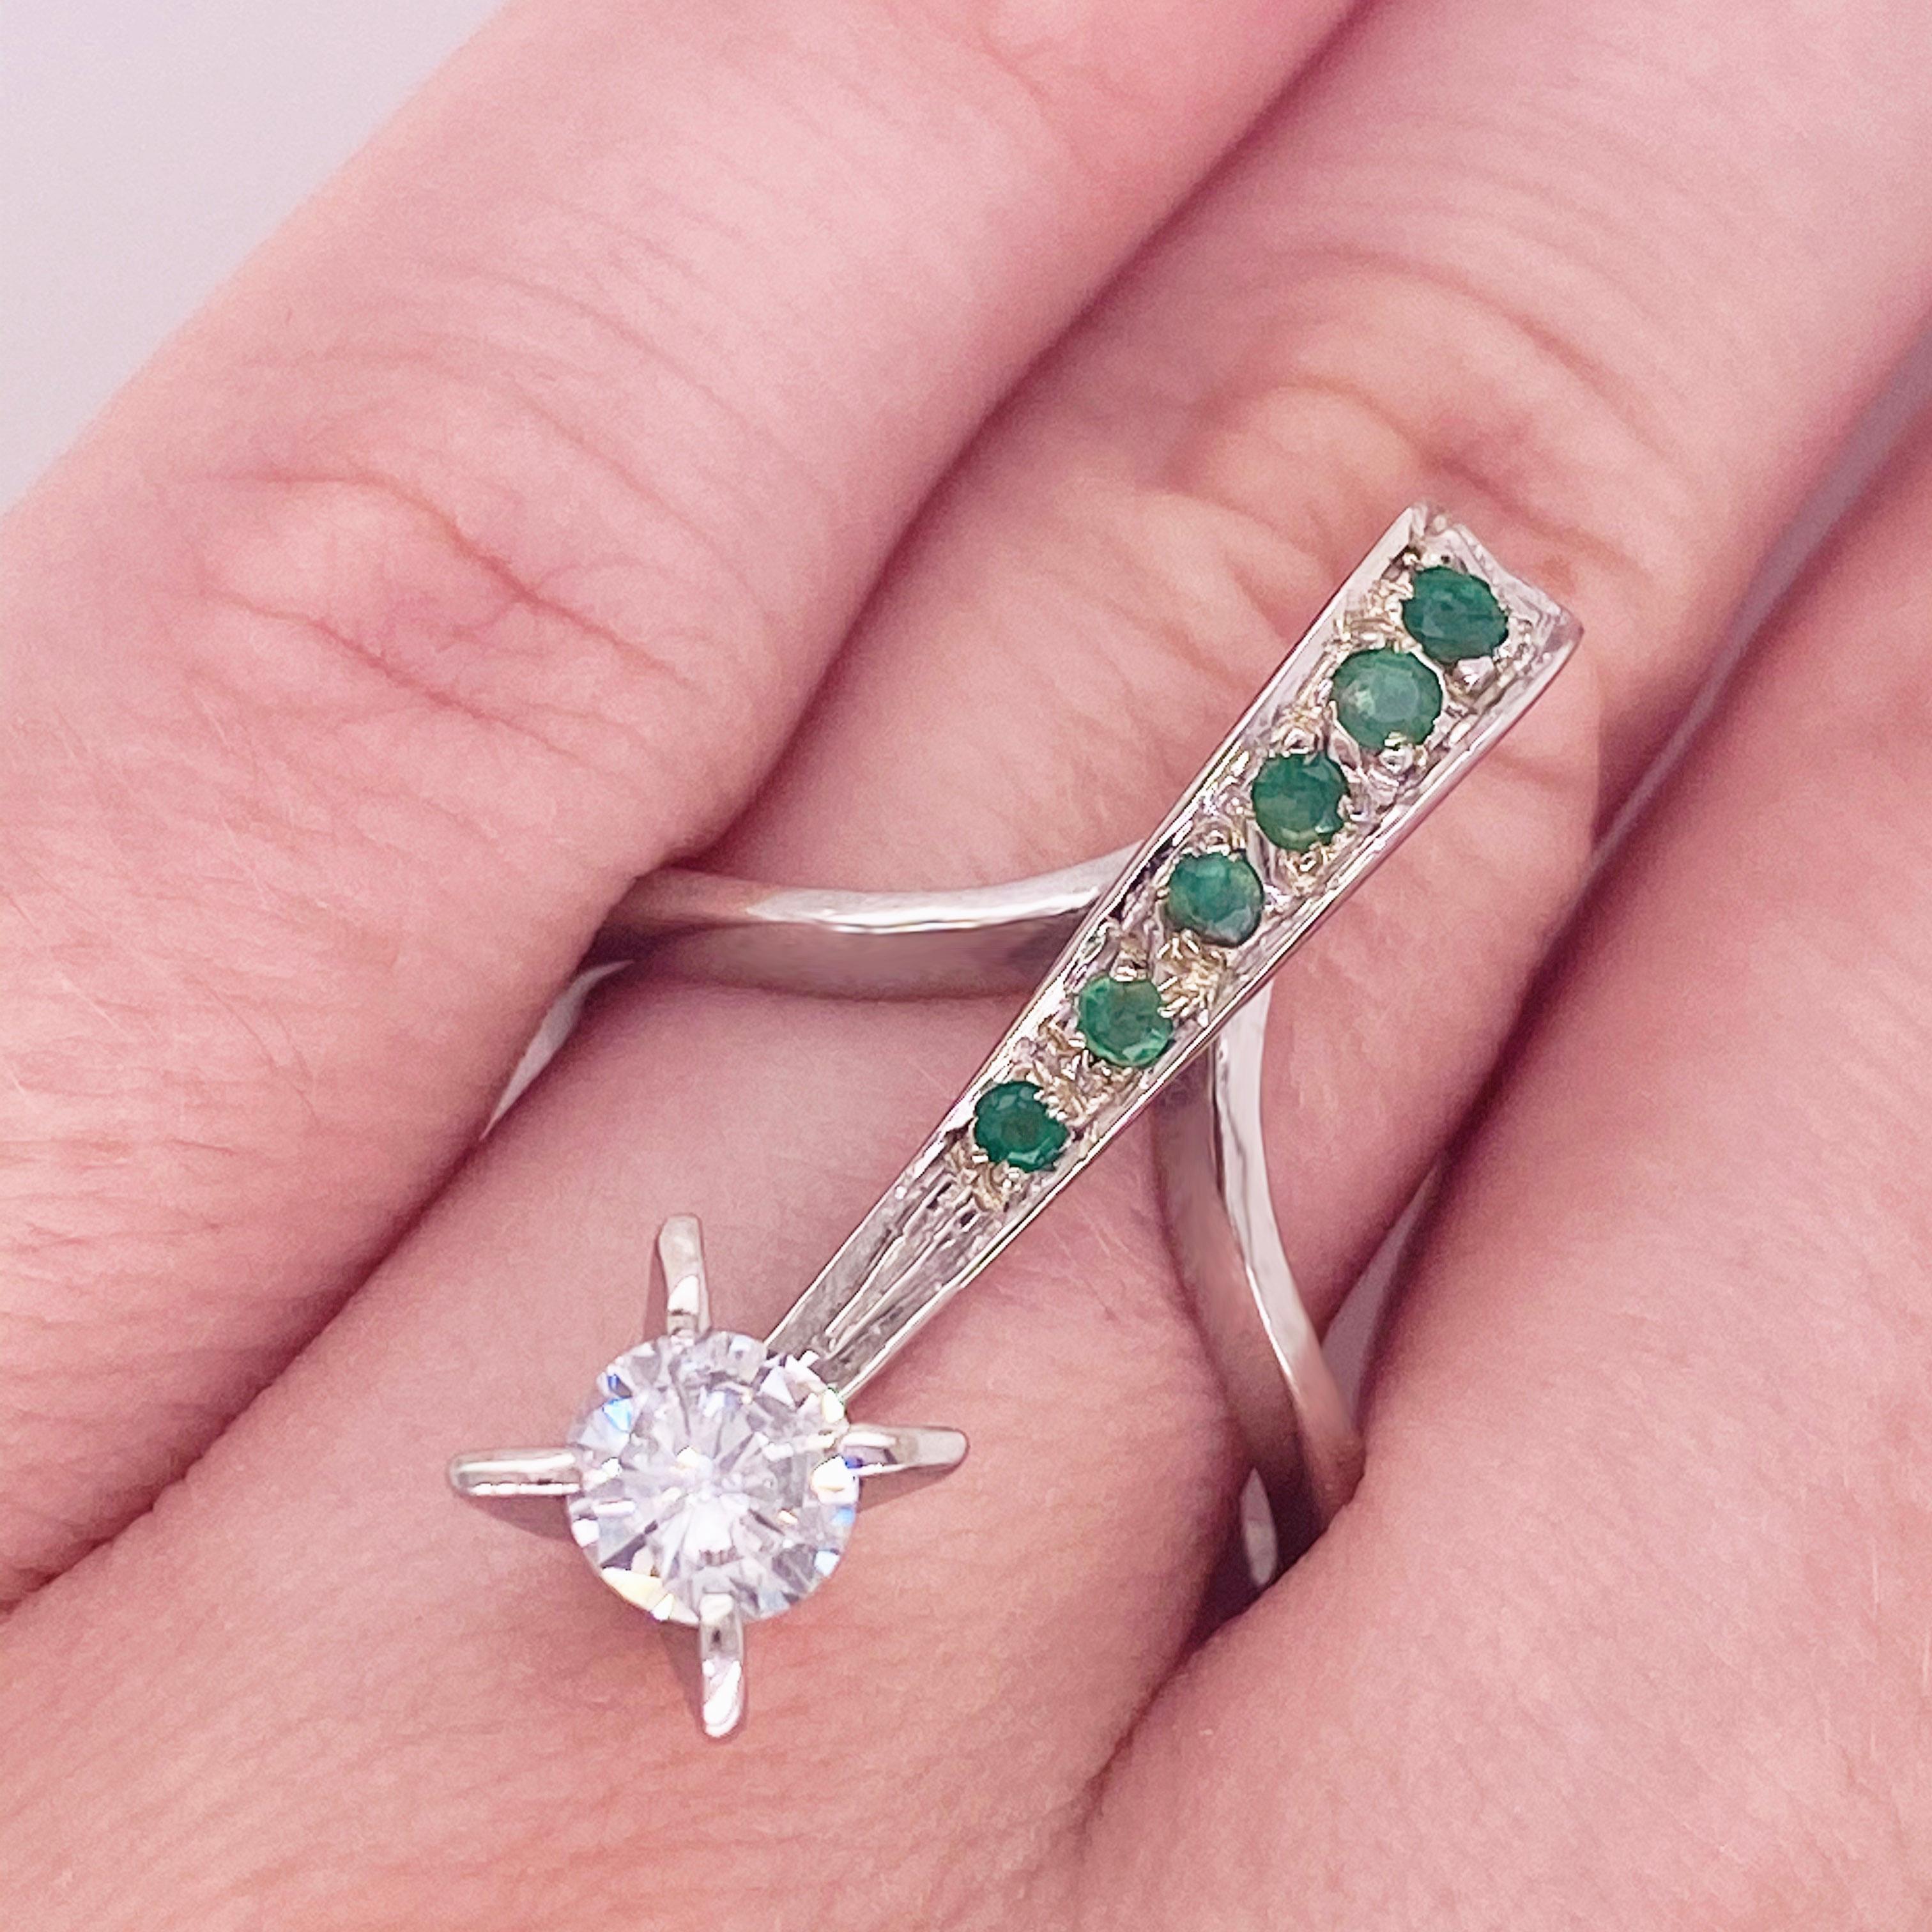 You have never seen anything like this before! This gorgeous freeform ring covered in emeralds and showcasing a stunning white diamond is sure to be a showstopper and a conversation starter. Its beautiful curved design elegantly elongates the finger